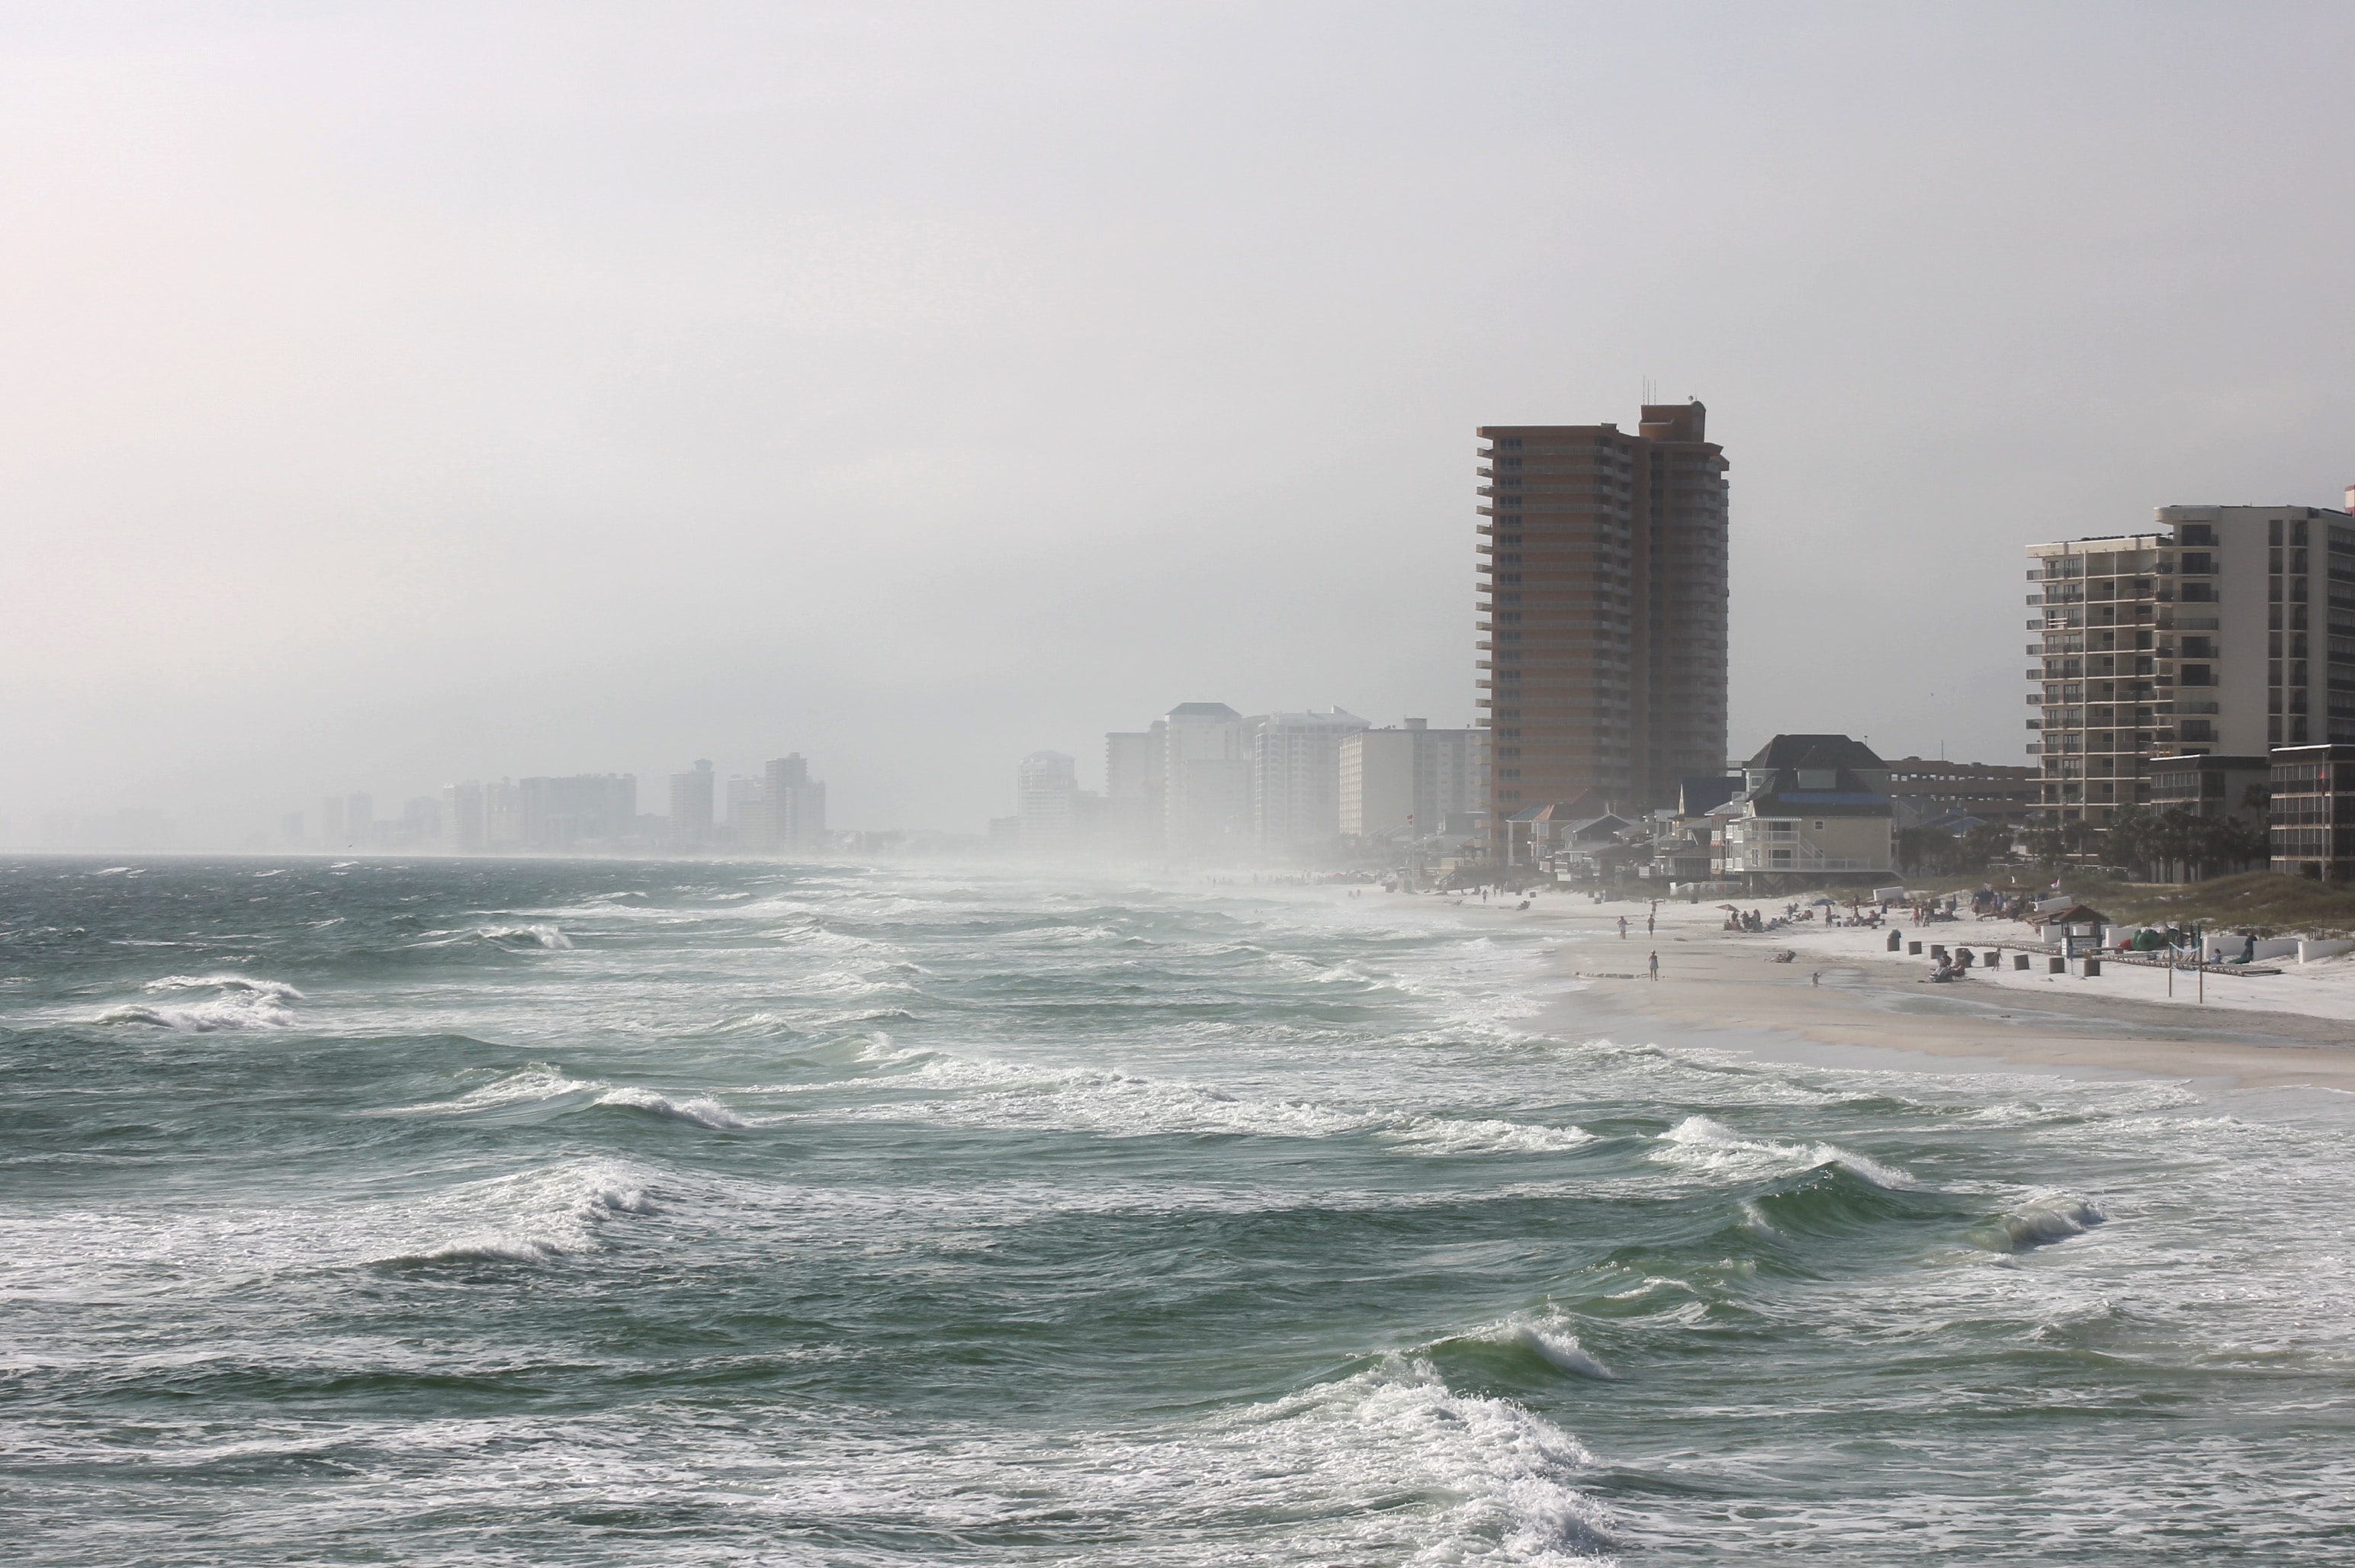 A cityscape alongside a beach setting is met with large crashing waves and gray sky